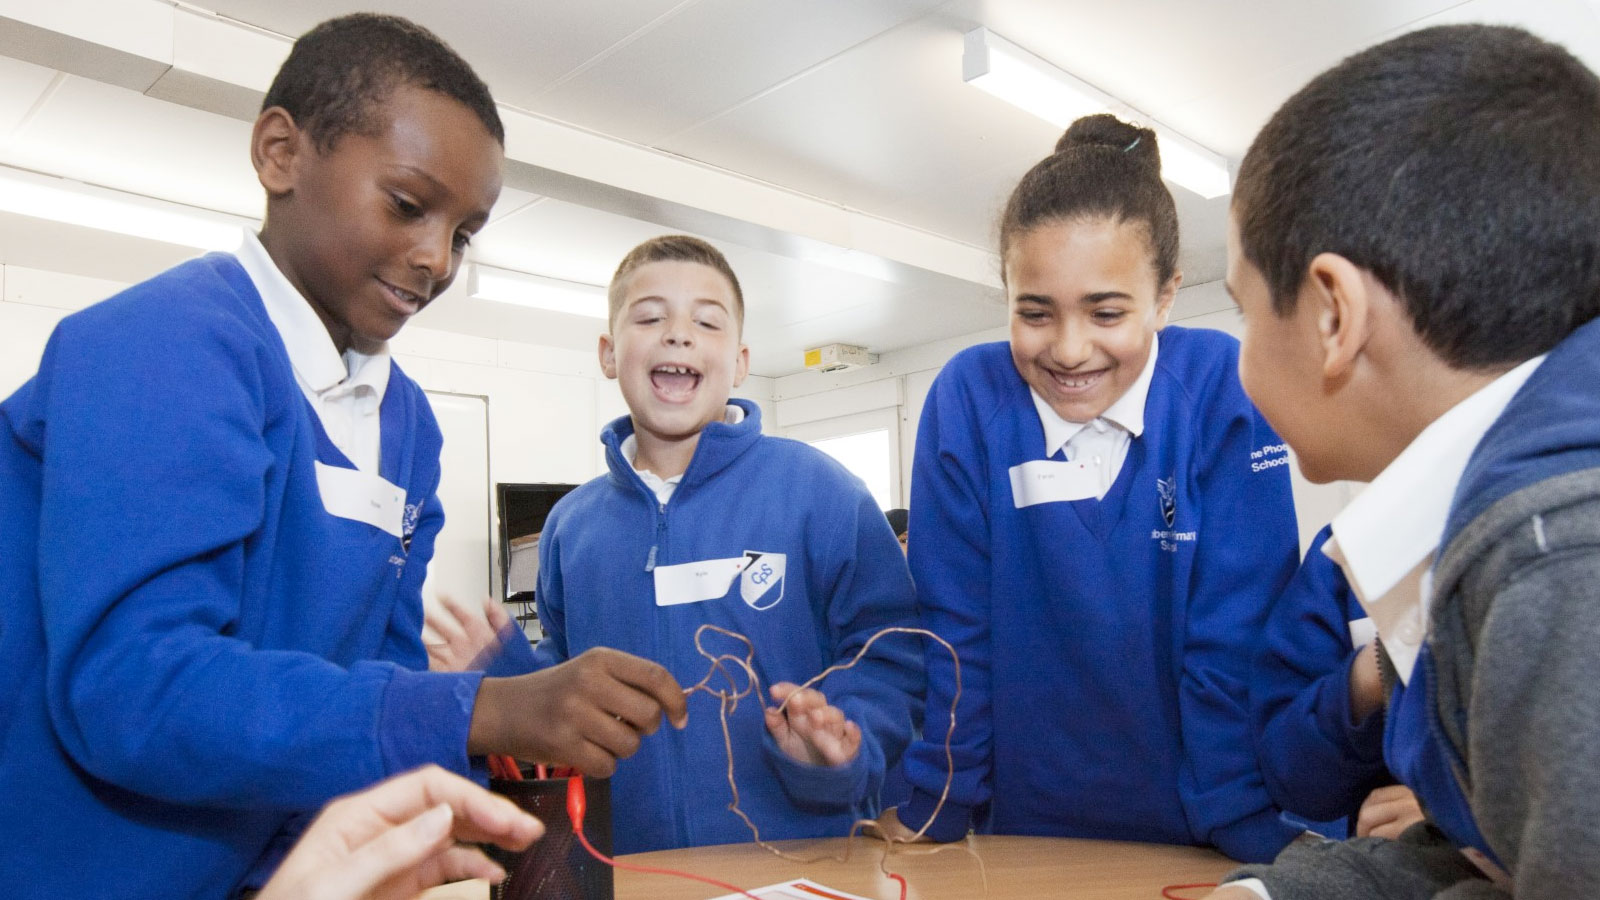 National Grid is set to fund STEM projects aimed at young individuals from underprivileged and economically-disadvantaged backgrounds.